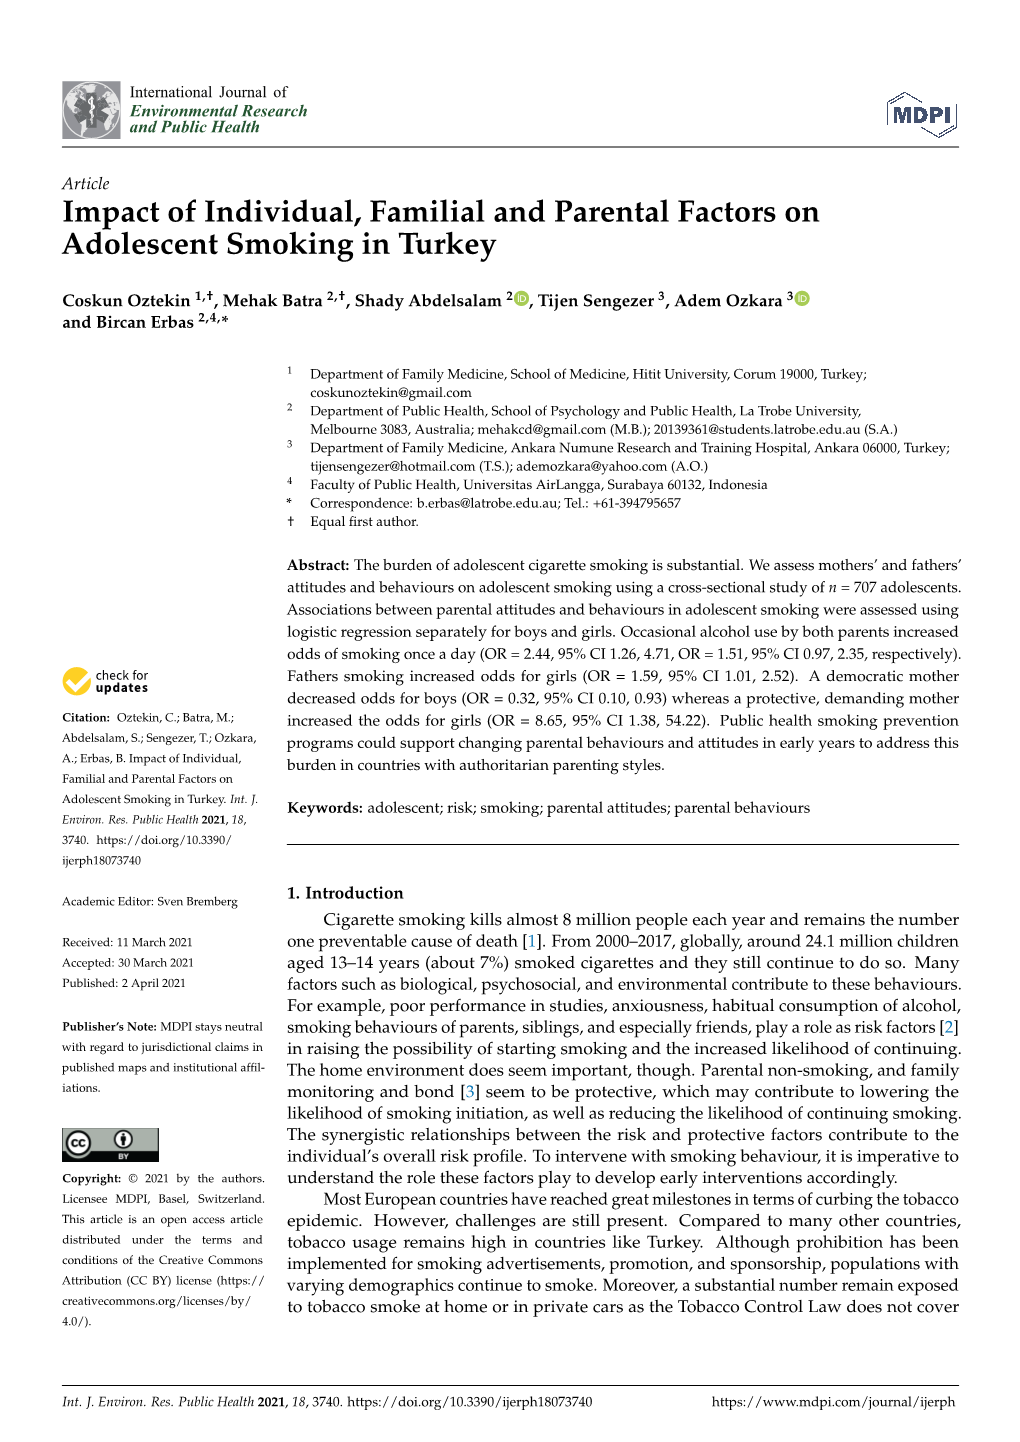 Impact of Individual, Familial and Parental Factors on Adolescent Smoking in Turkey